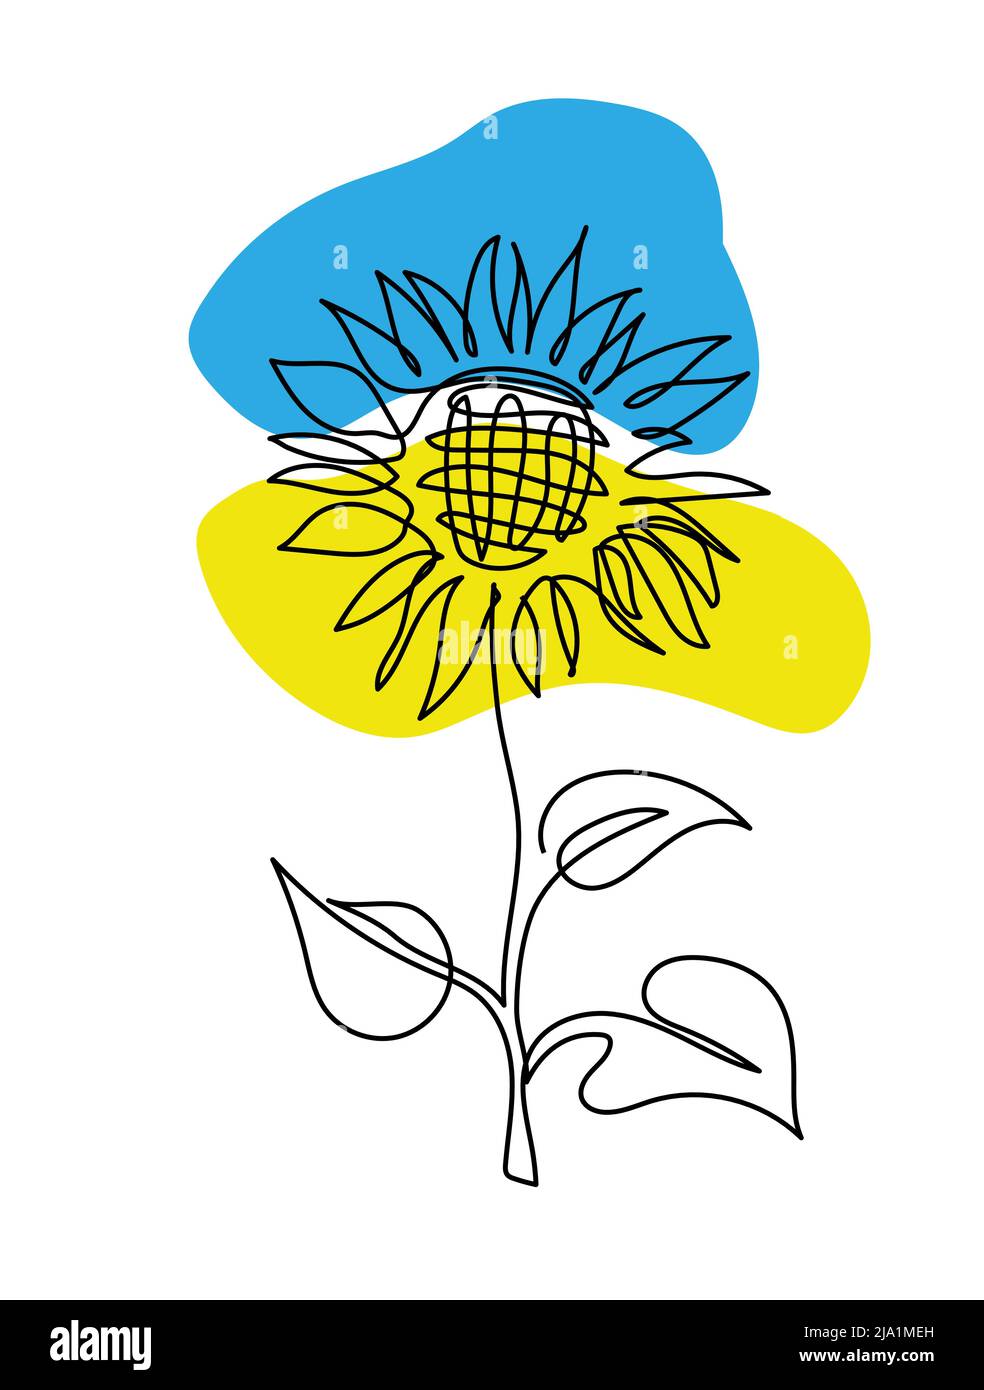 Single sunflower simple vector line illustration. One line art drawing of sunflower with colors of ukrainian flag blue and yellow Stock Vector